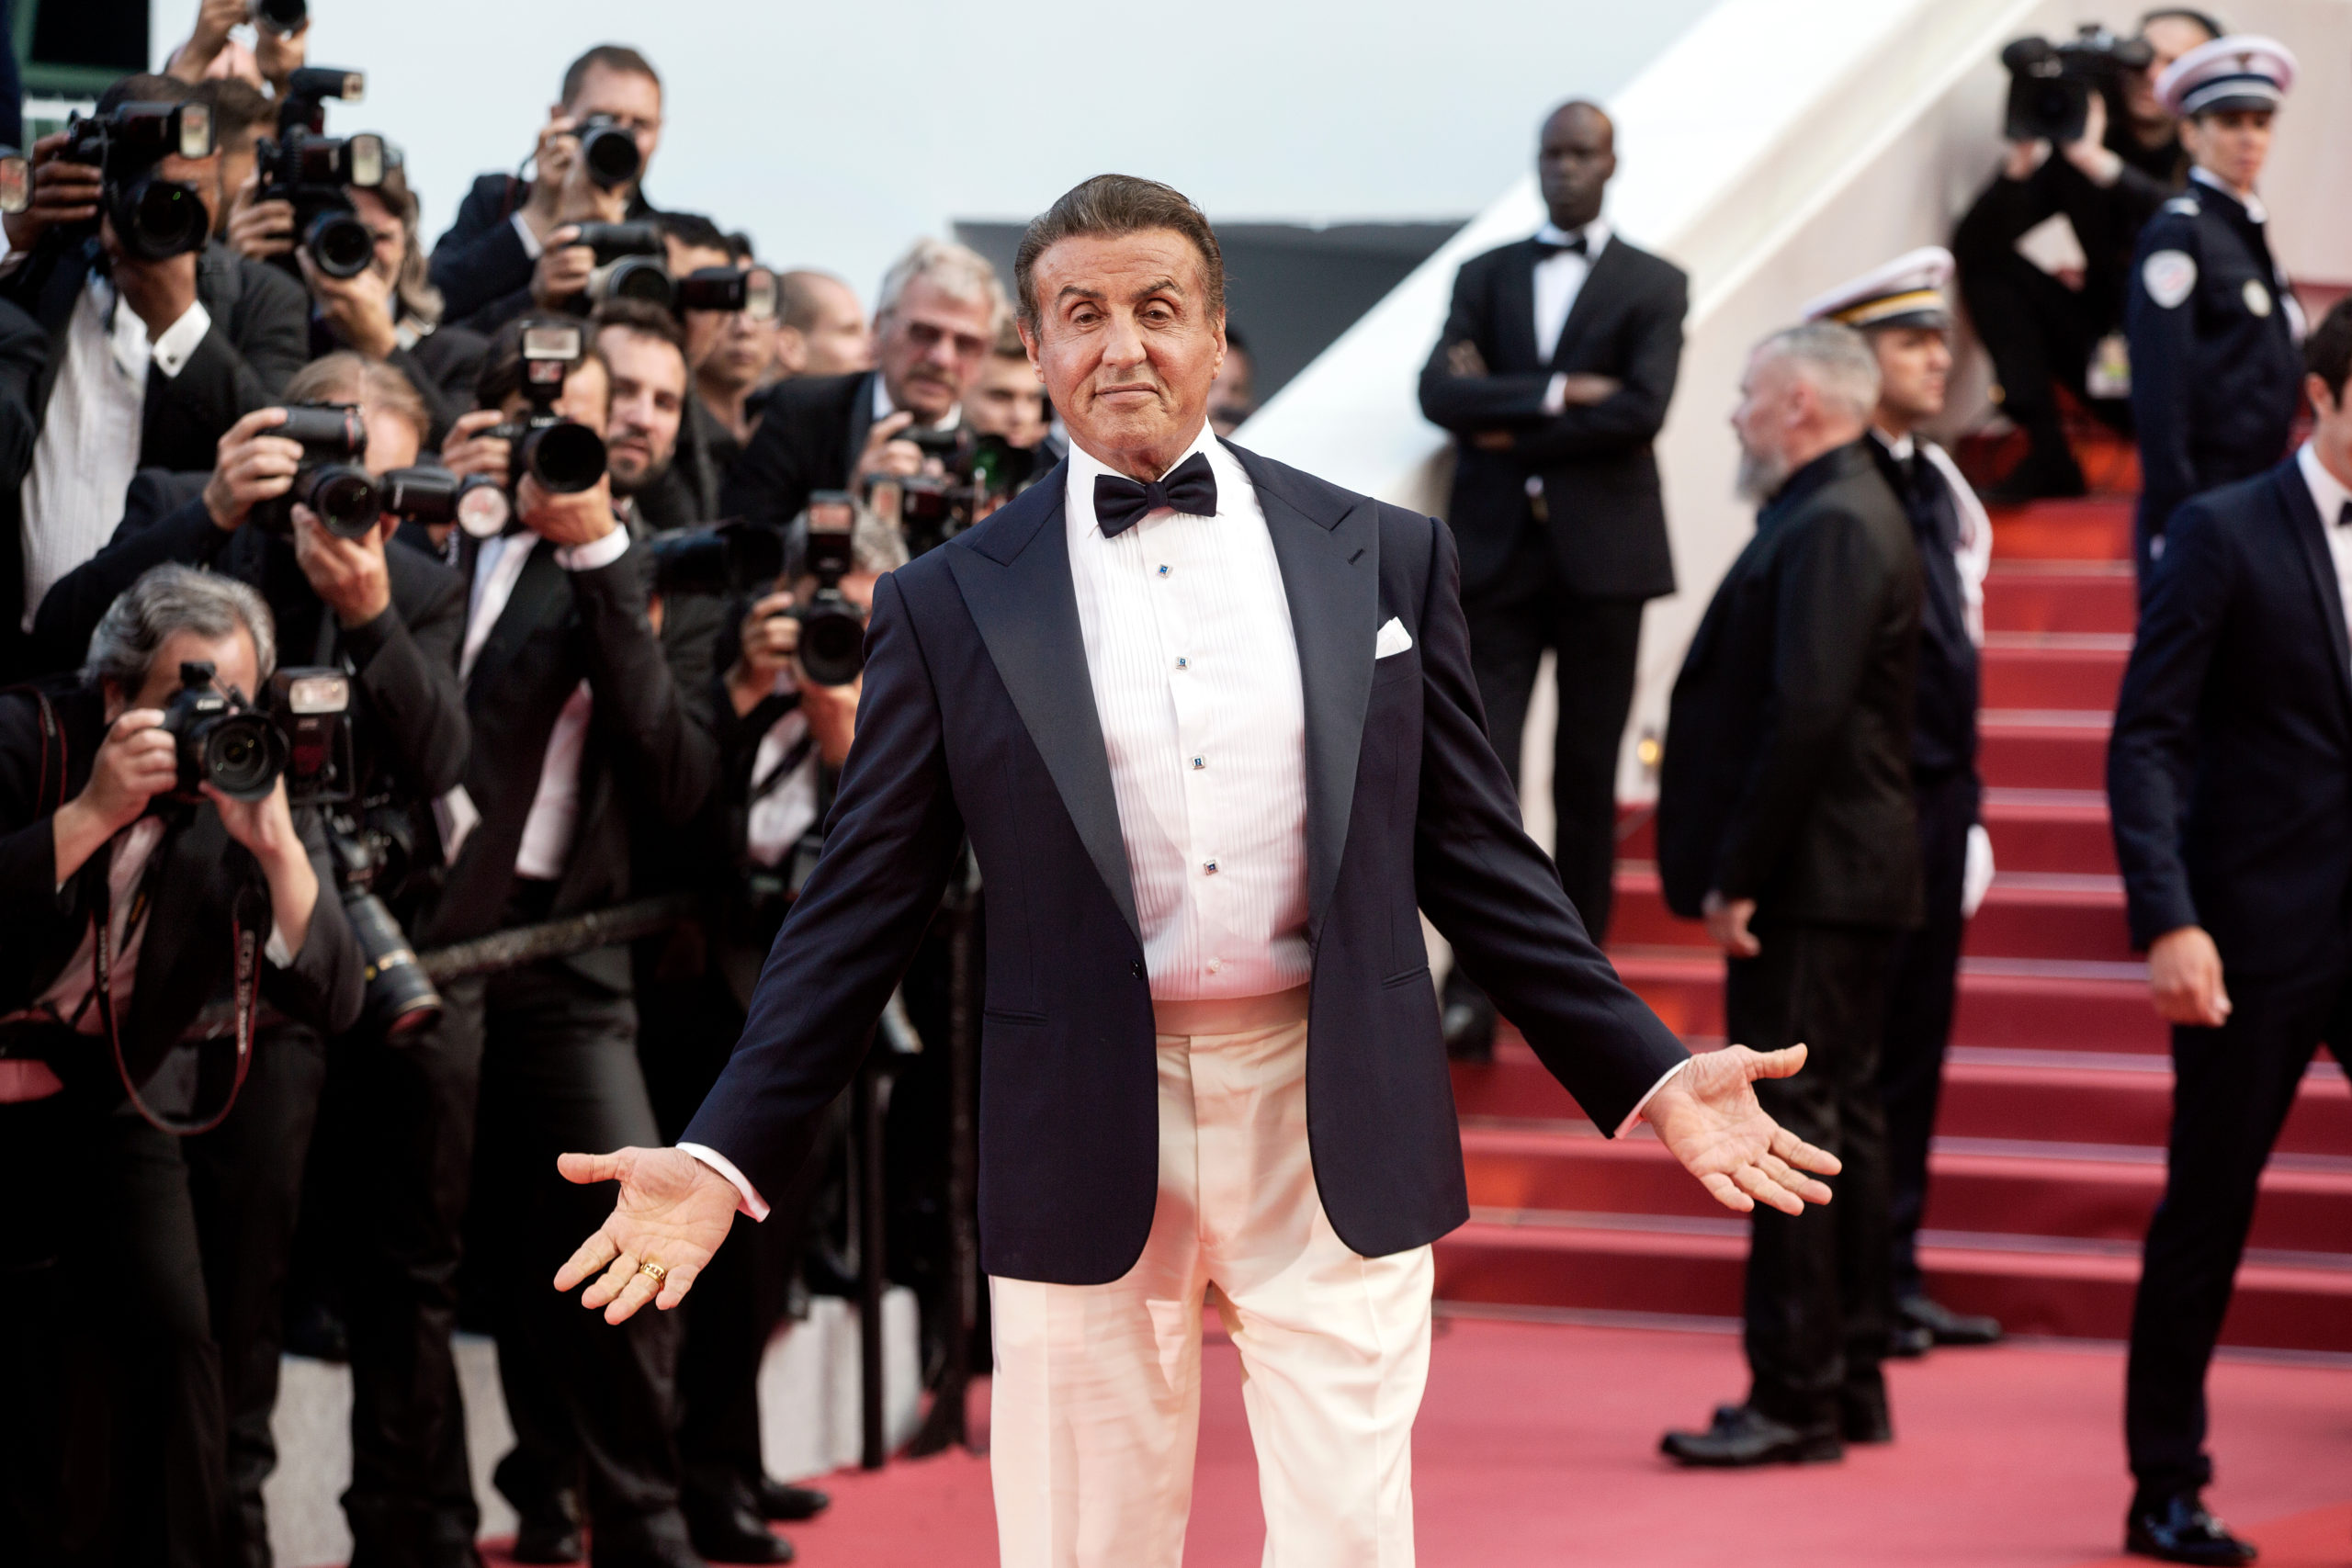 How would Stallone’s alleged misconduct sit with the Courts of England and Wales?